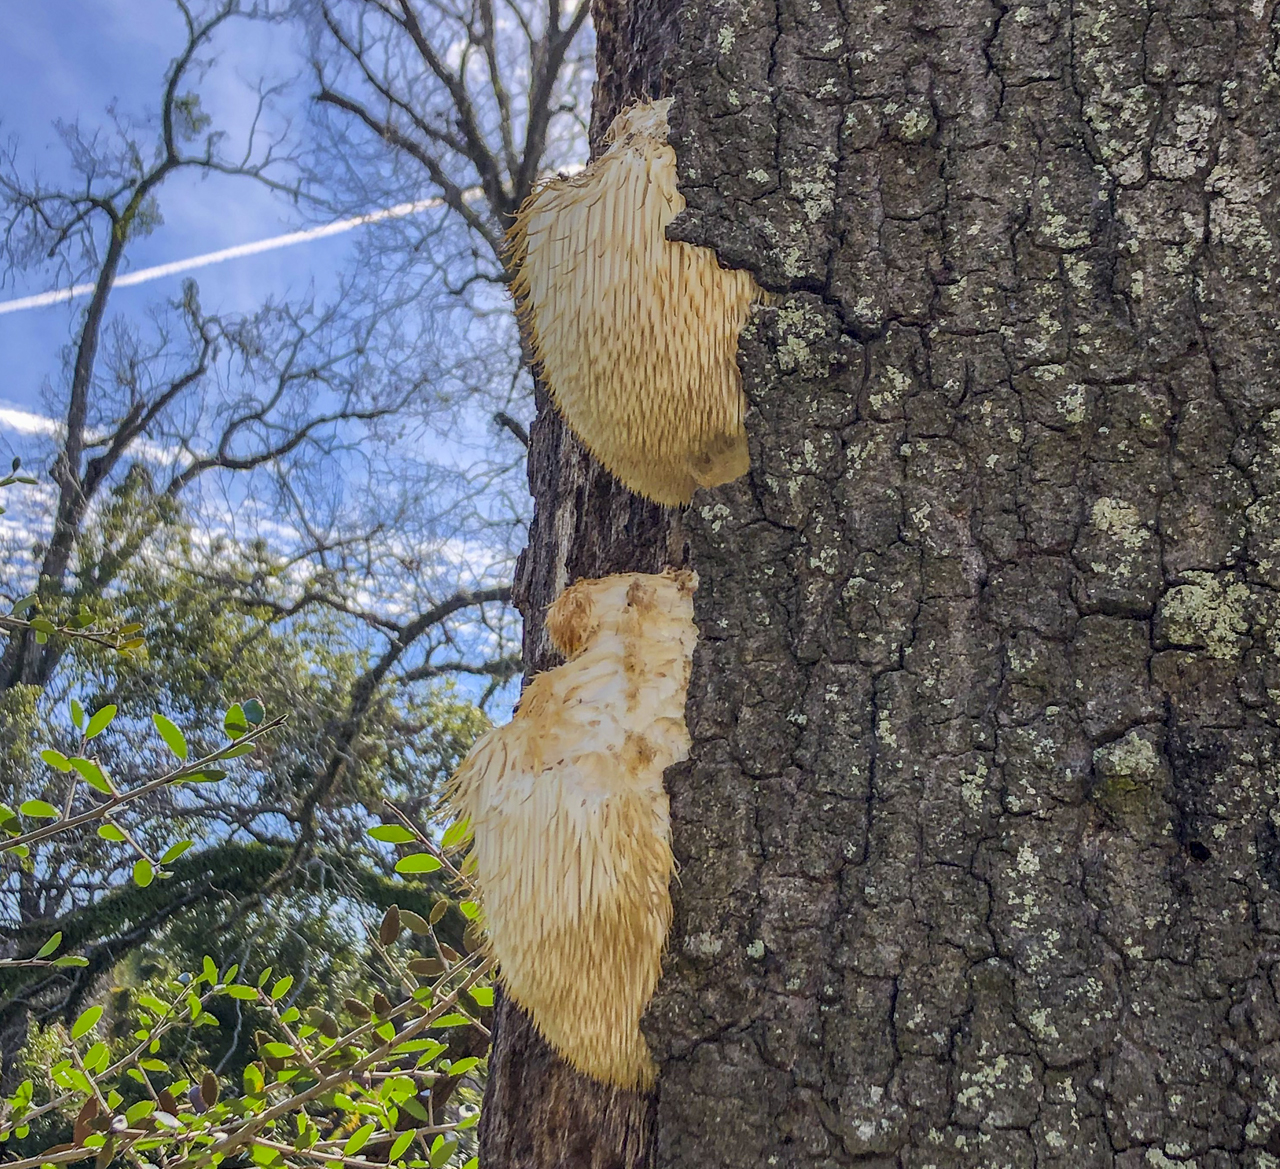 This lion’s mane fungus tends to be associated with decay in trees.